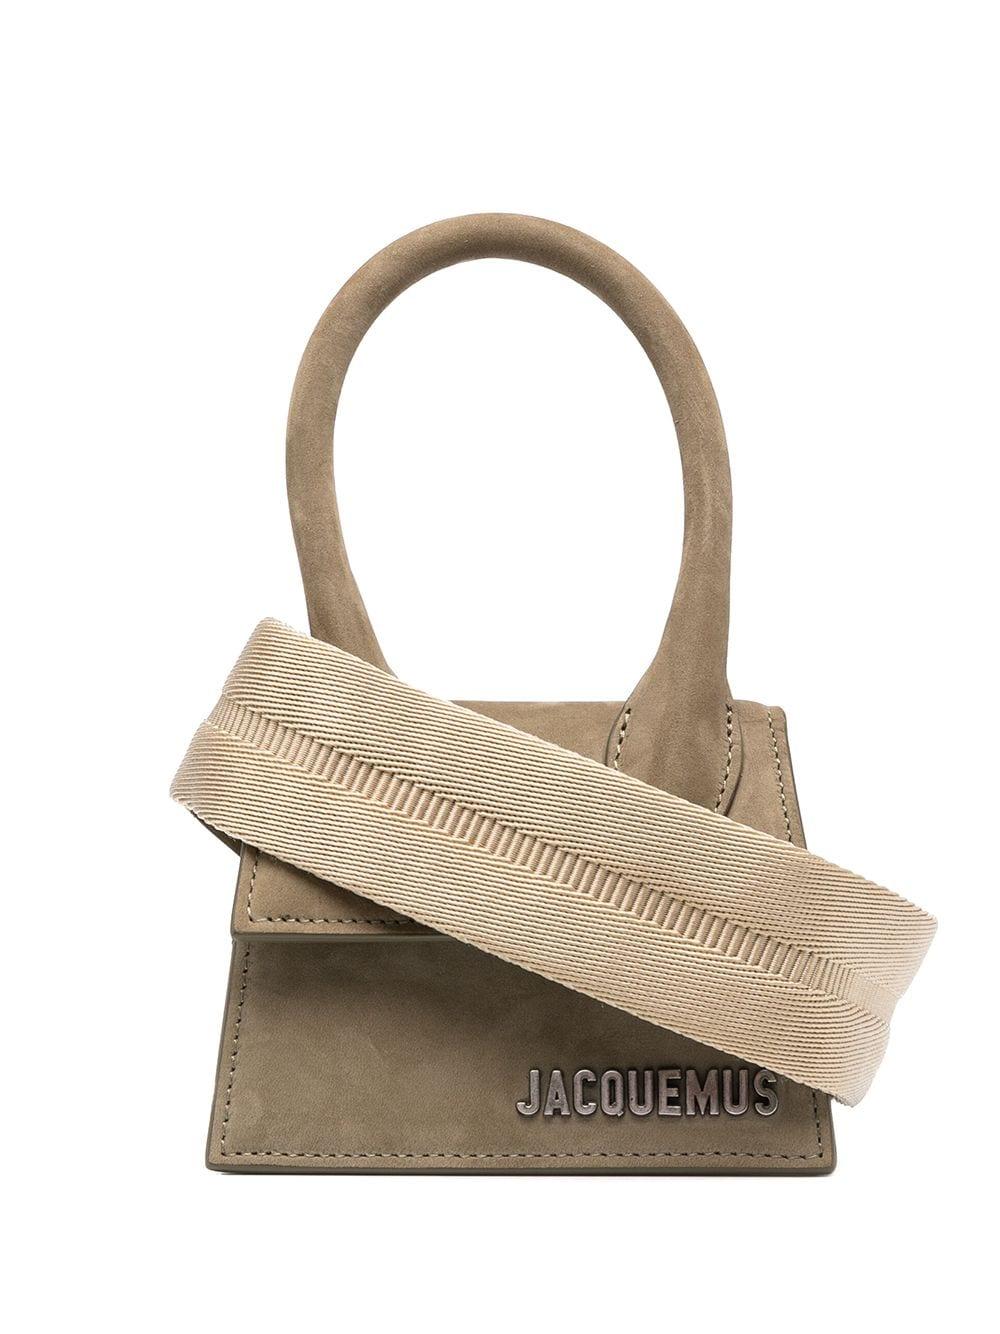 Jacquemus Le Chiquito Homme Mini Bag in Green for Men